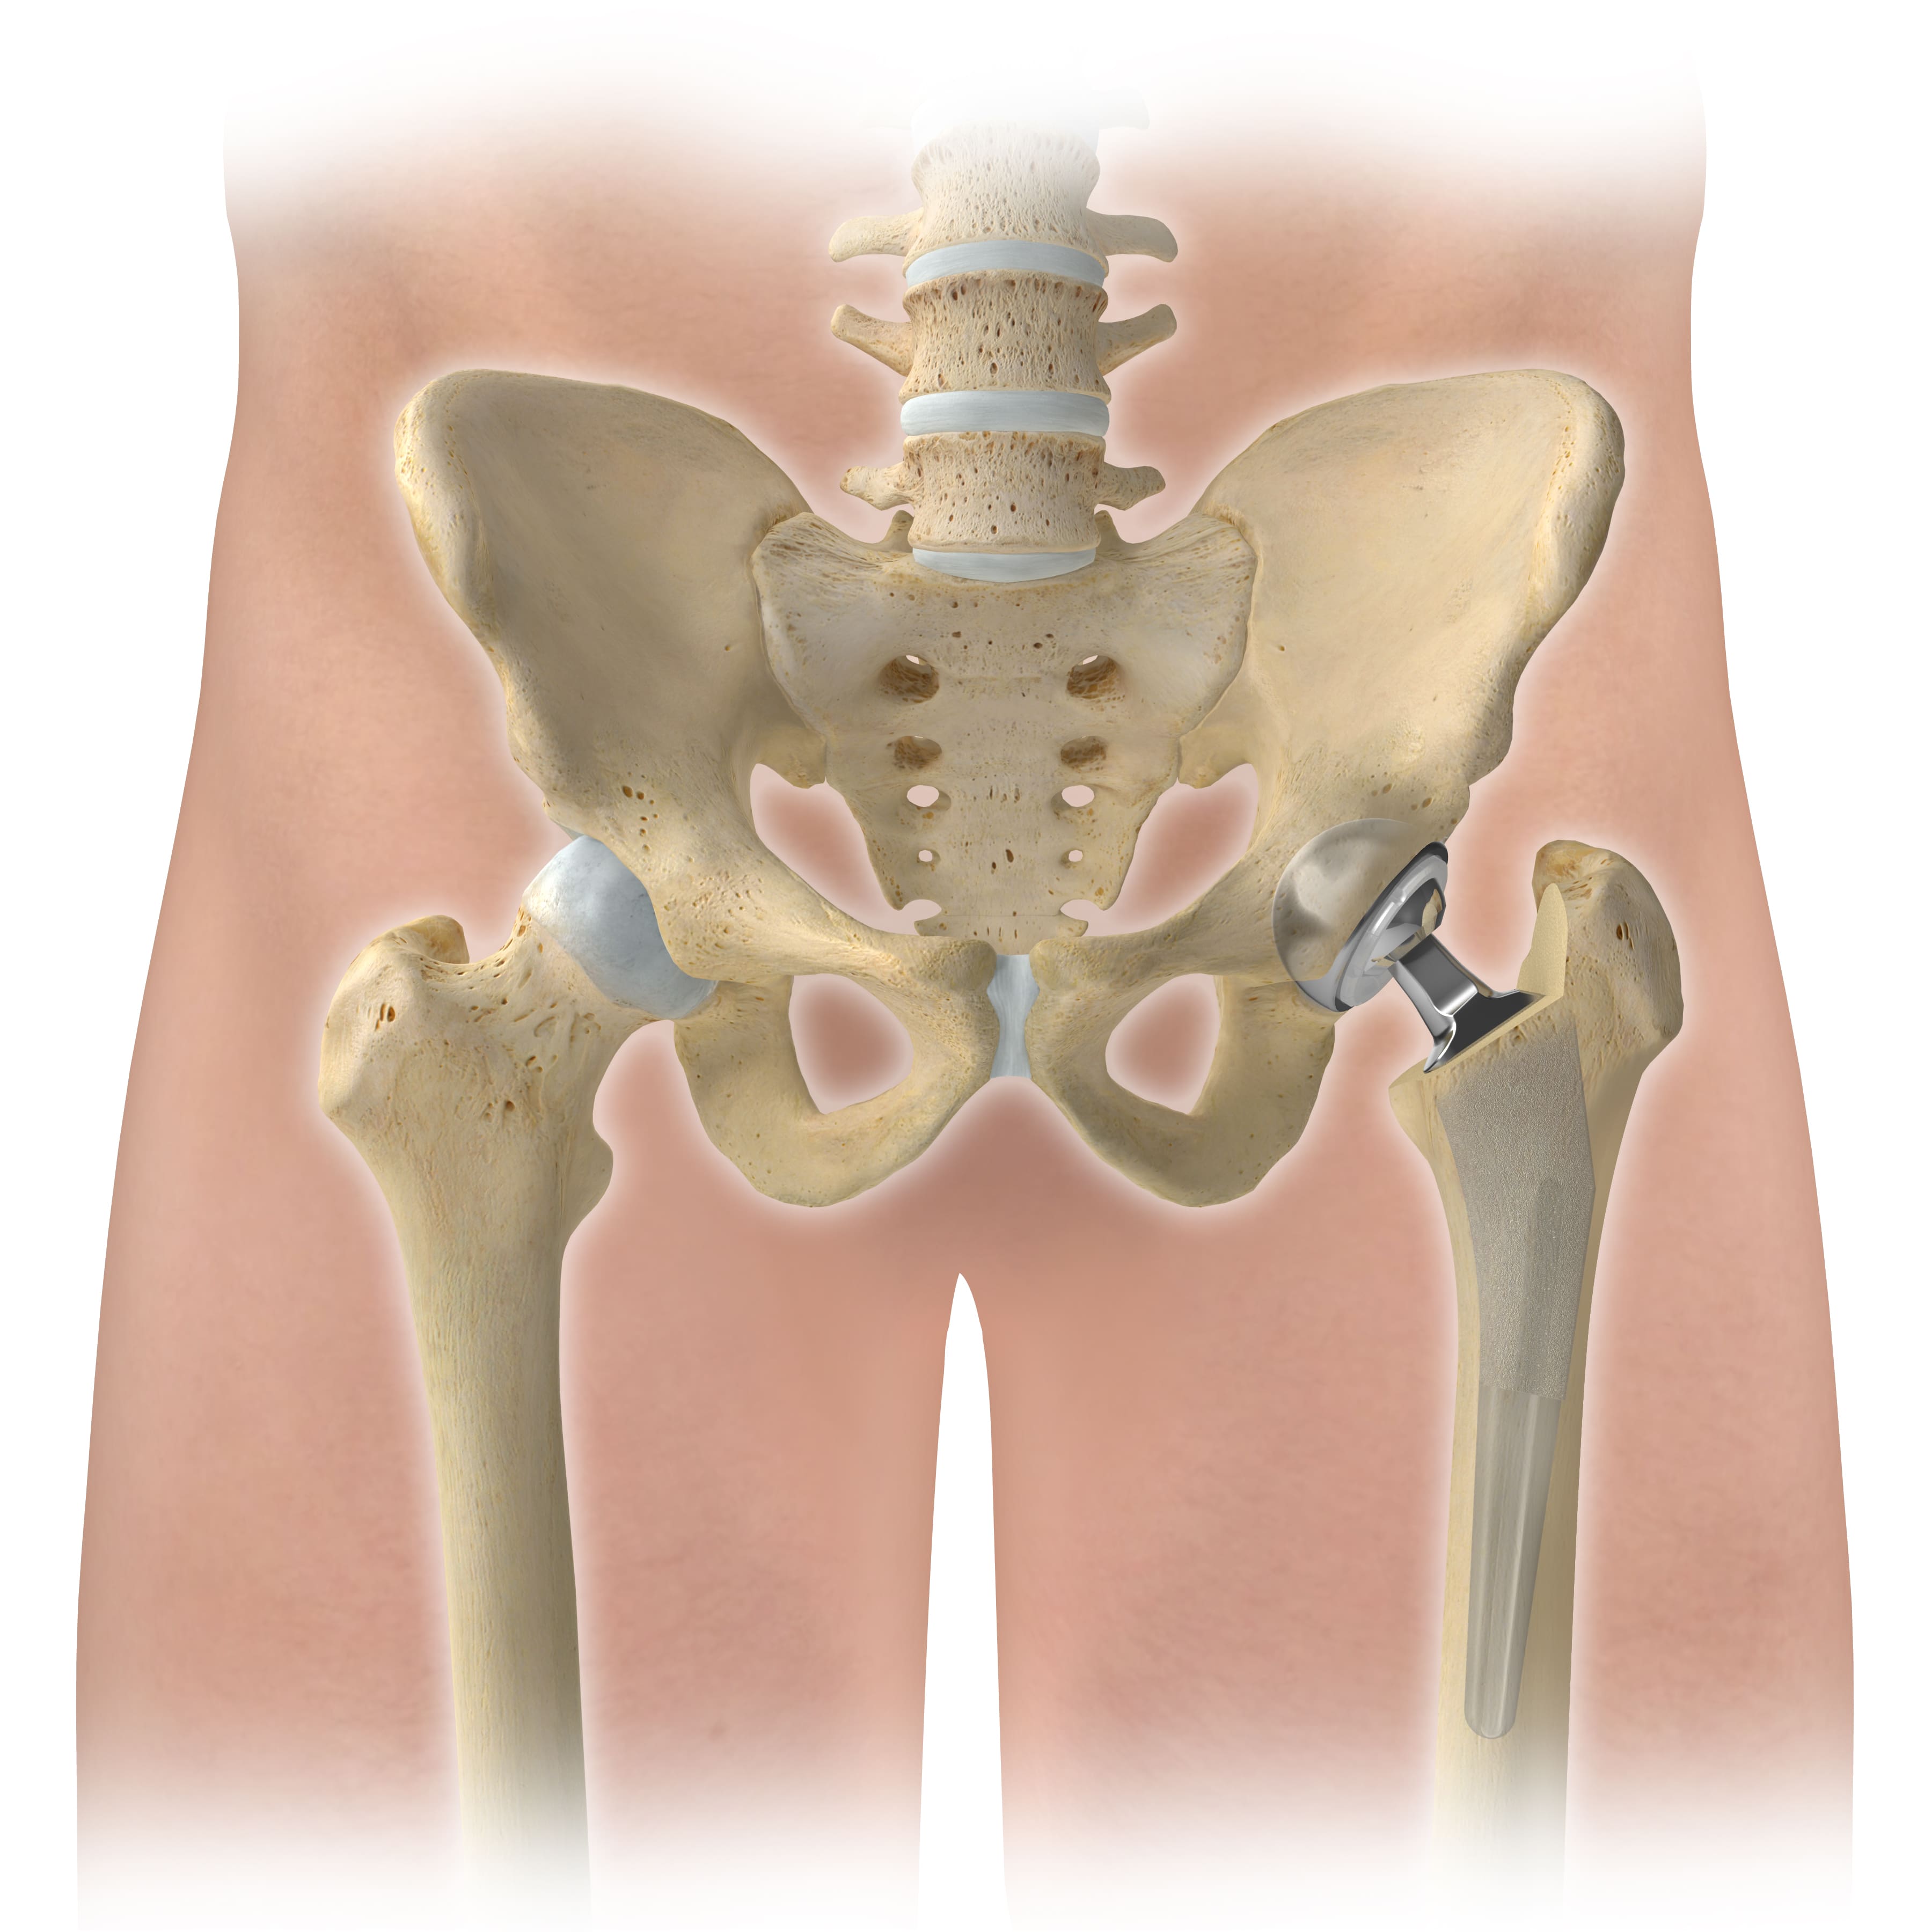 total hip replacement revision